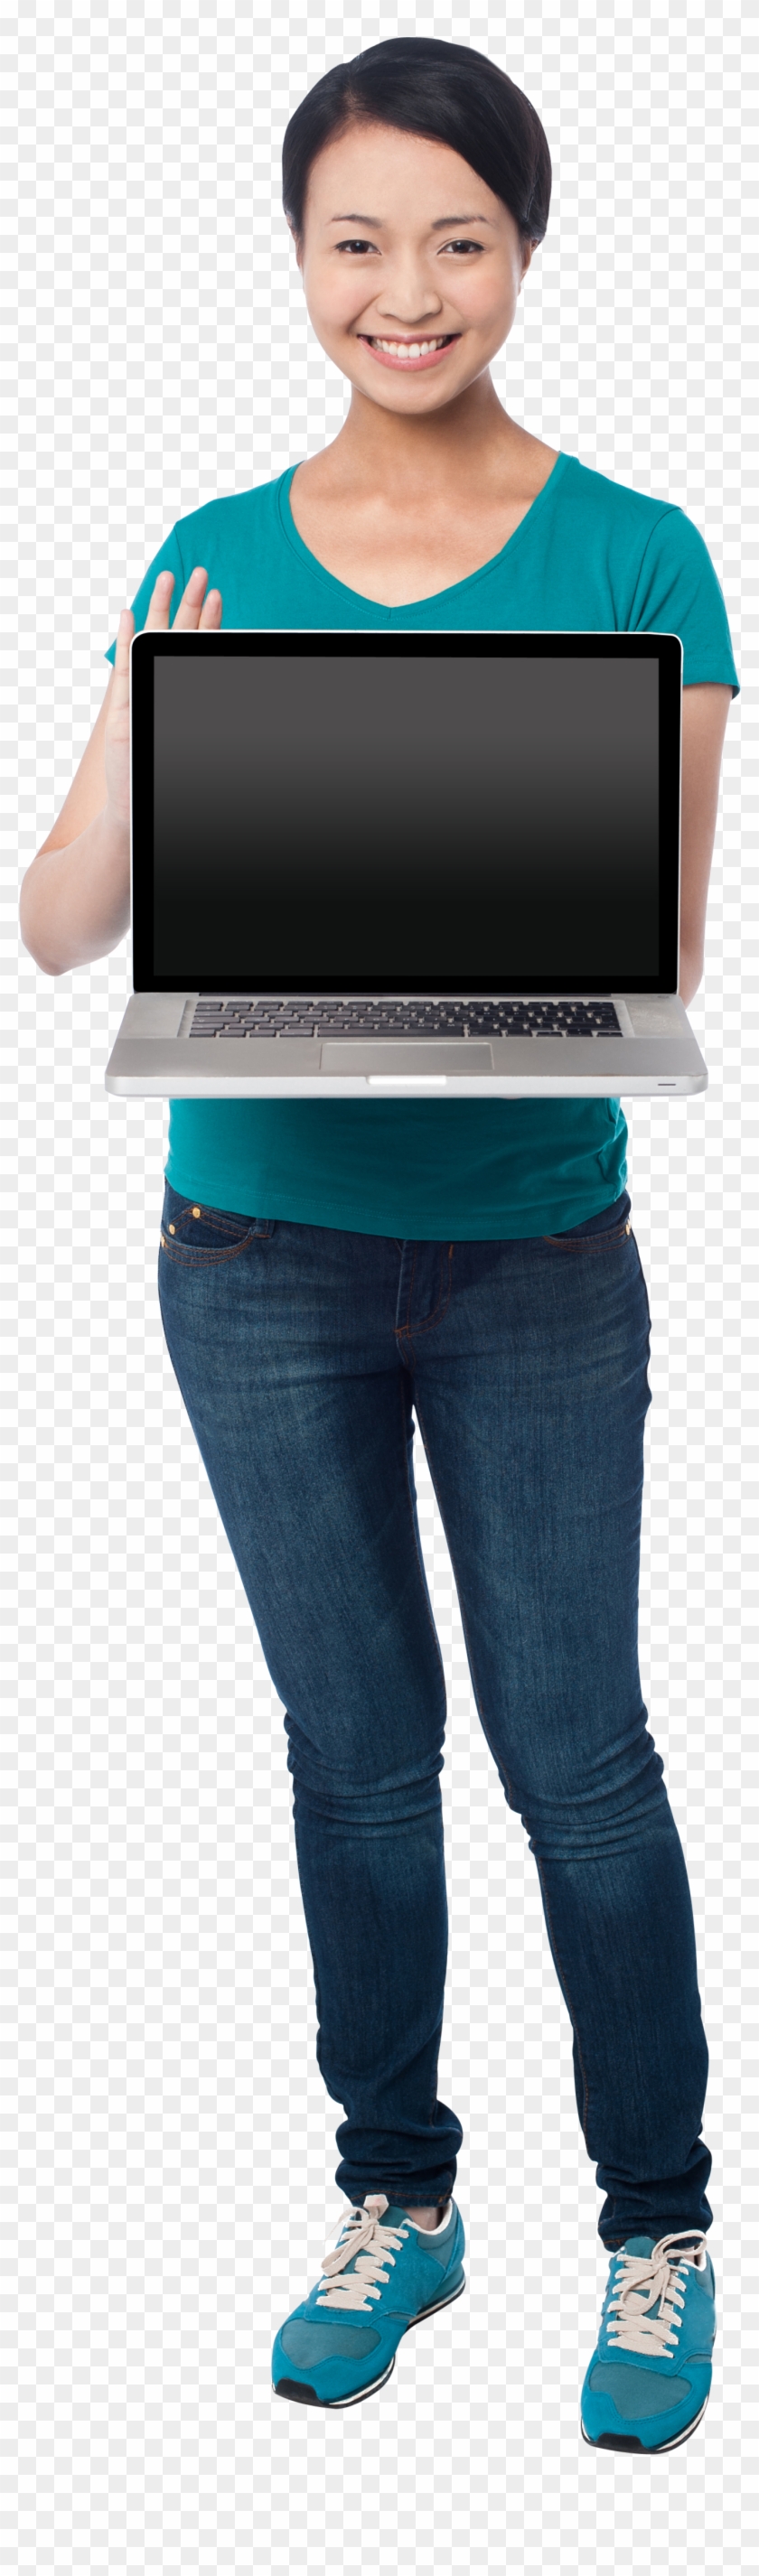 Girl With Laptop Clipart #892878